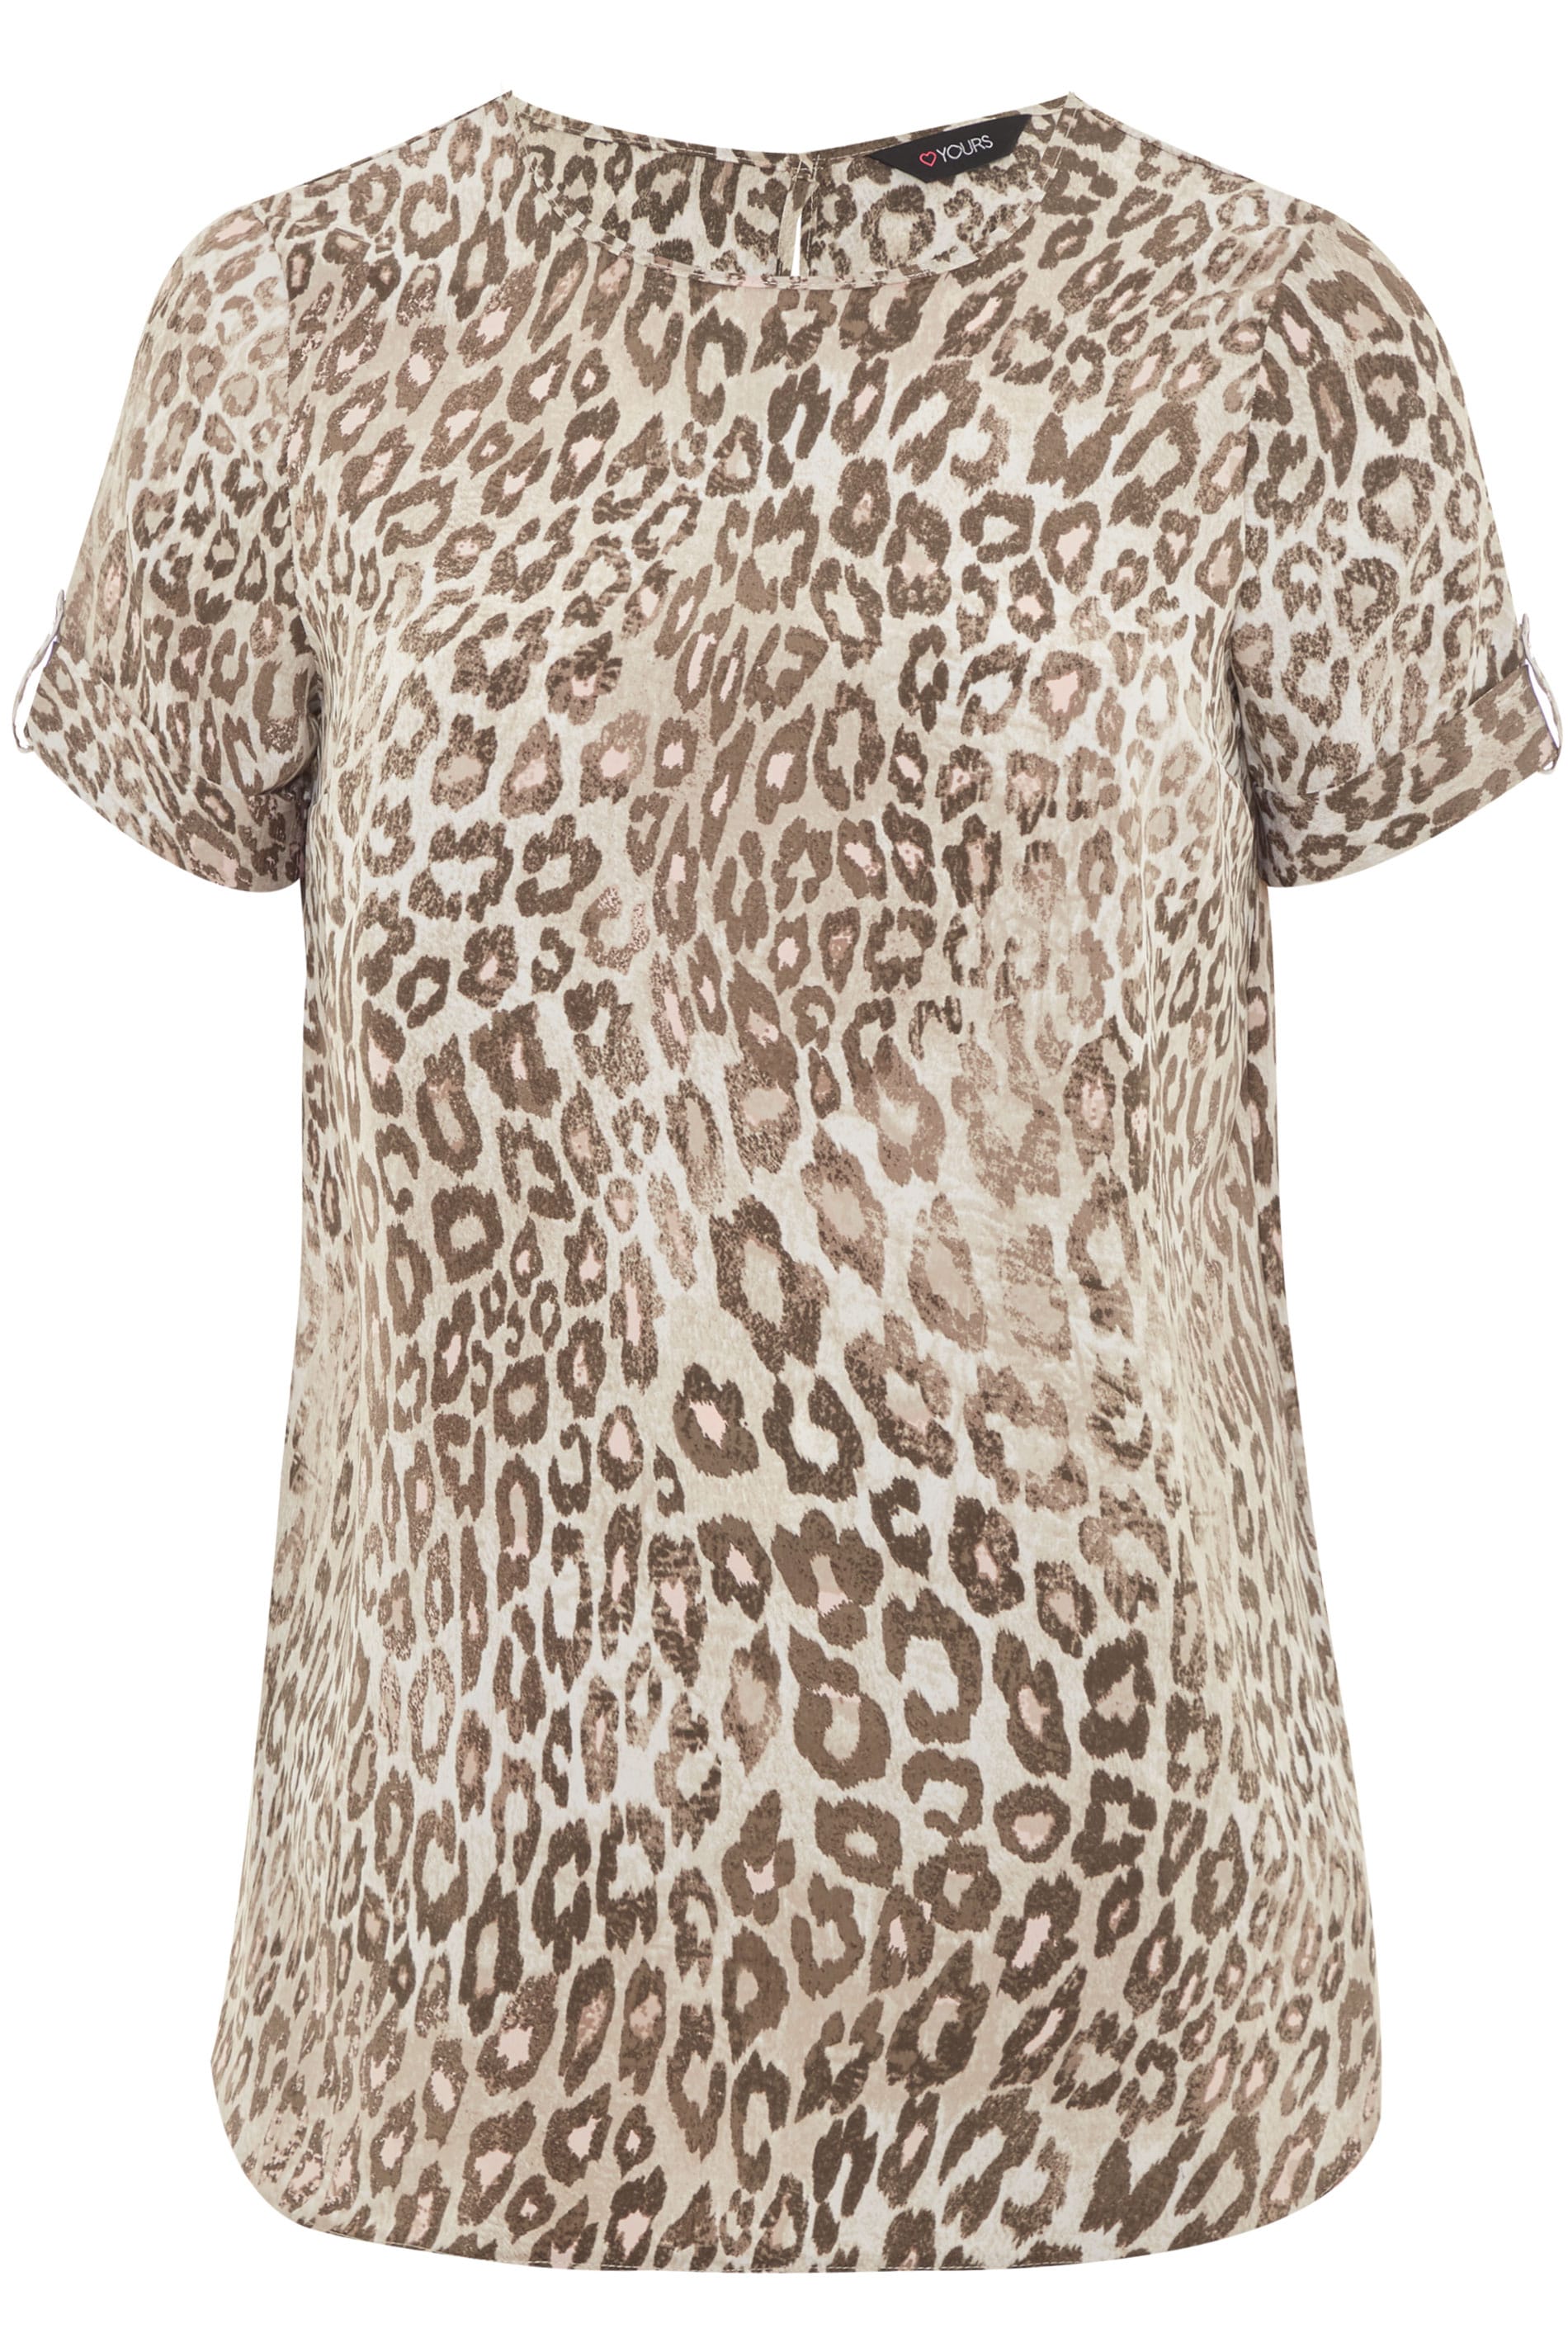 Stone Leopard Print Top | Yours Clothing